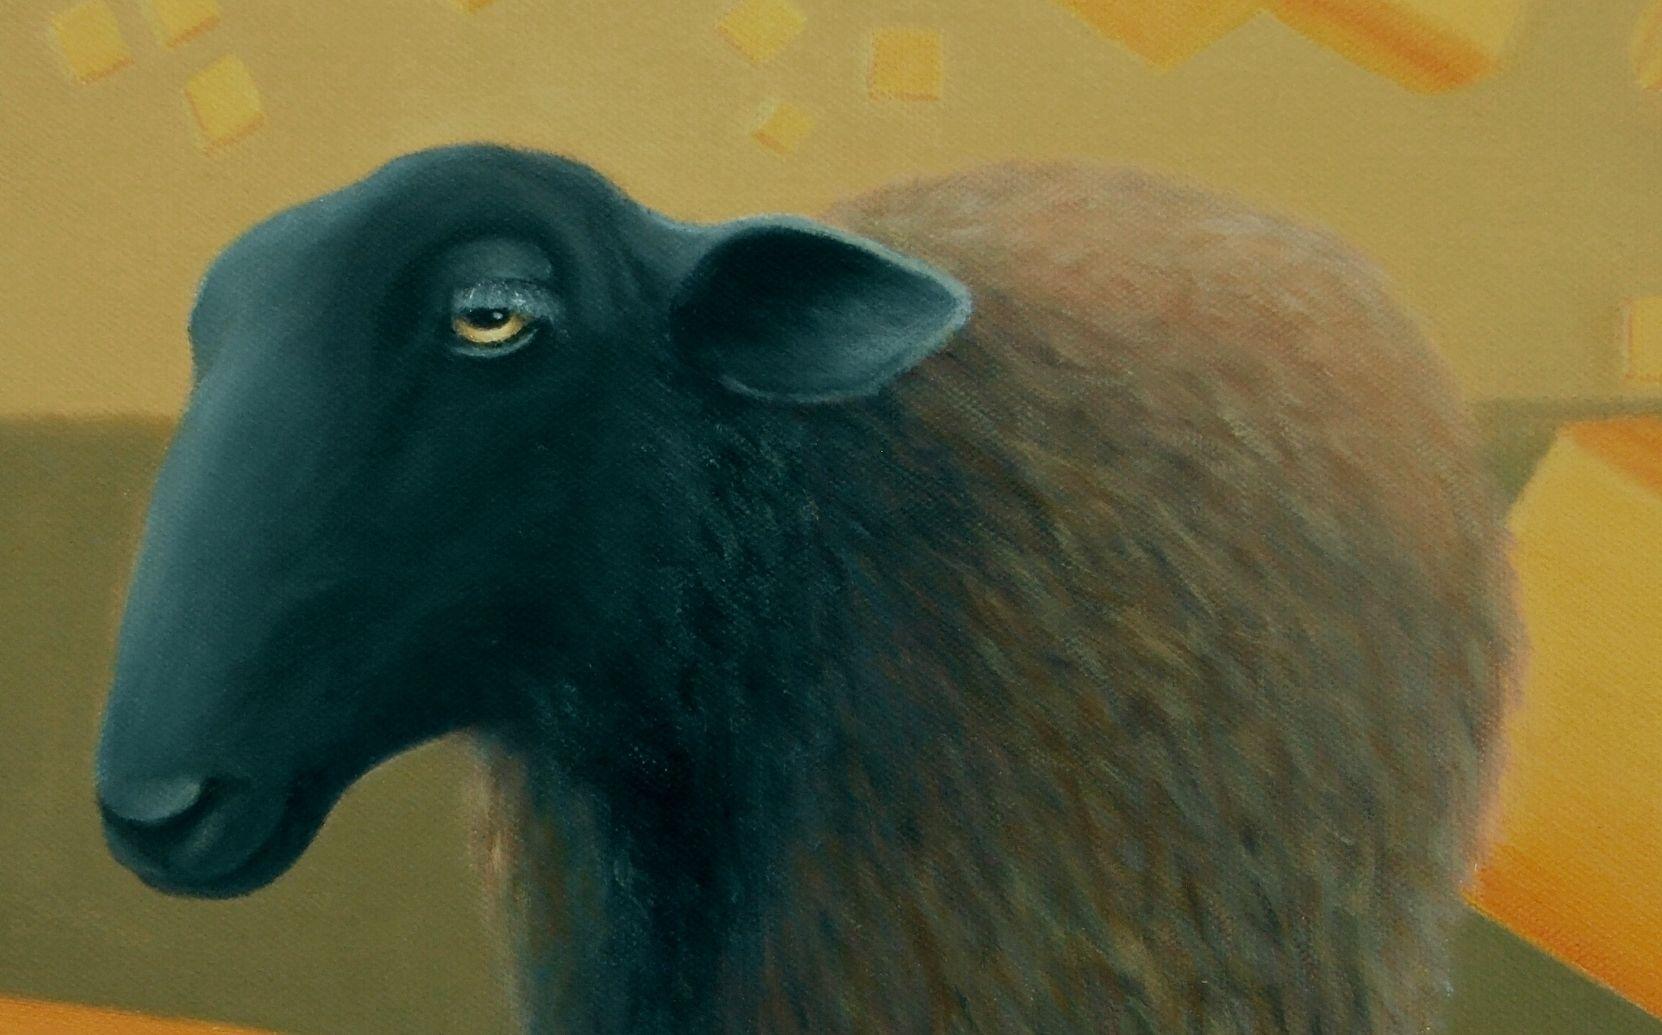  This painting came from my imagination, of a quiet sheep surrounded by floating blocks or the sometimes seemingly jumble of life!  This oil painting is done on gallery wrap canvas, with the sides painted to match , wired to hang so that no framing